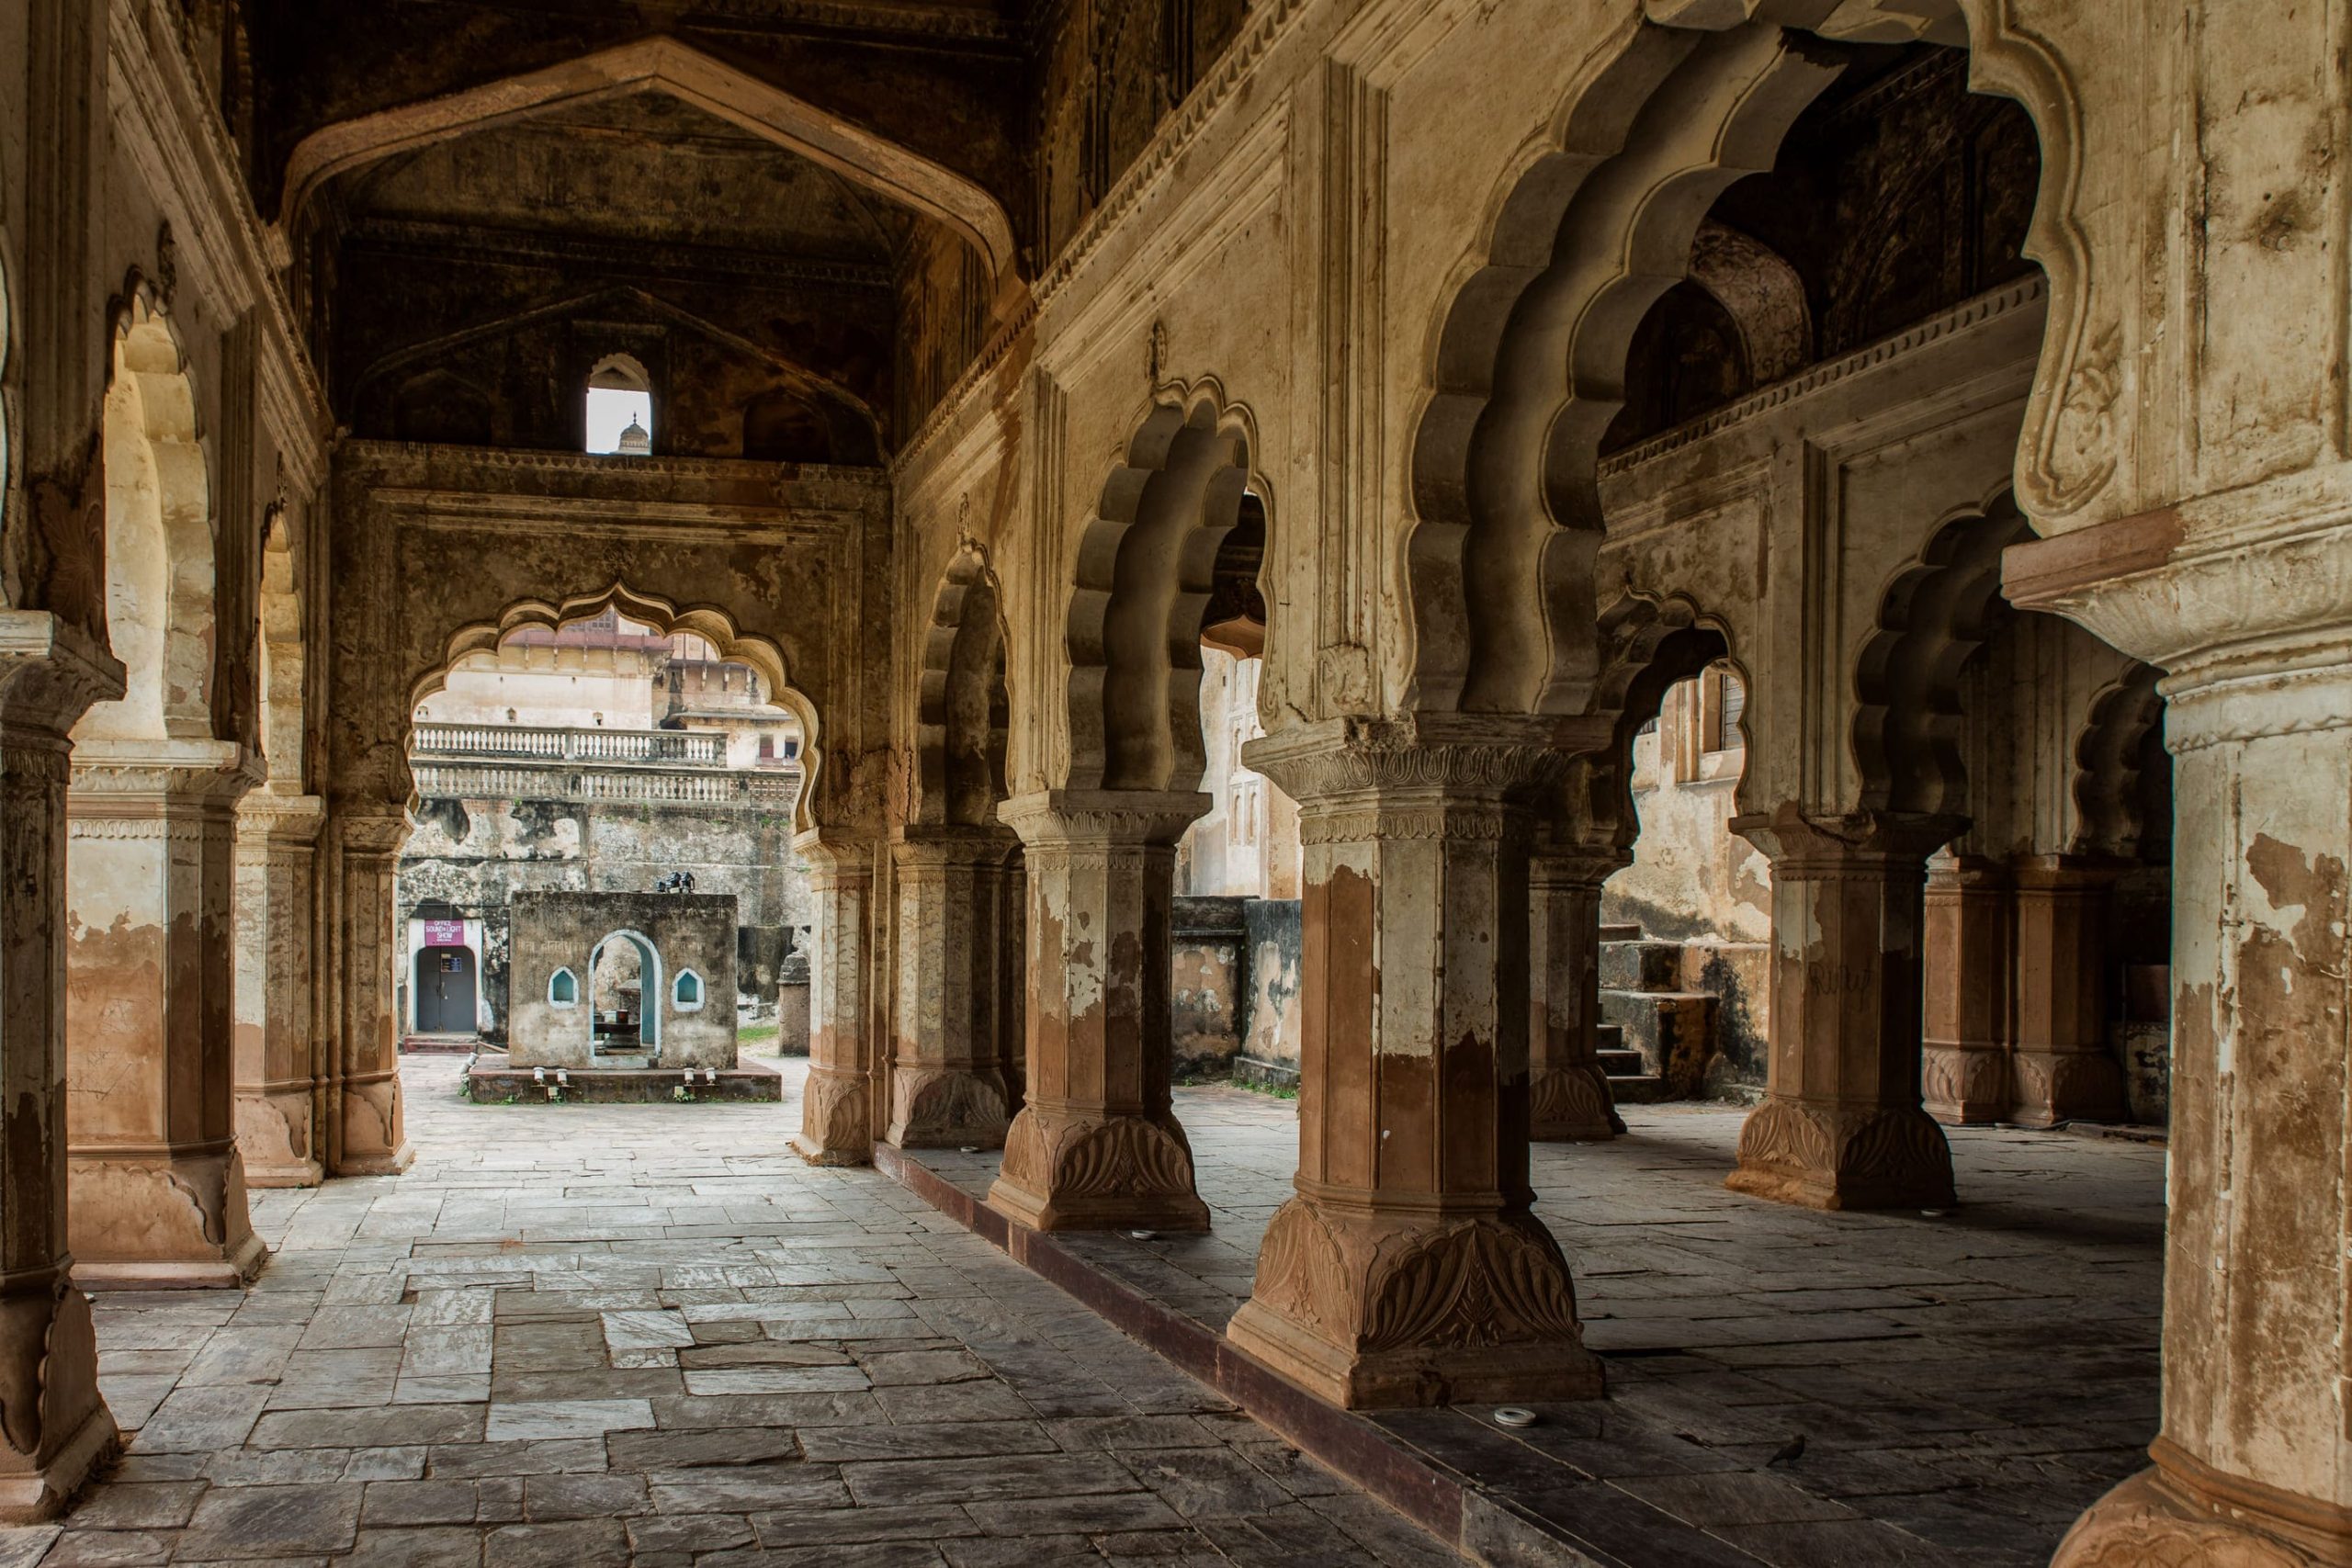 The corridor of Diwan-i-Aam or the Hall of Public Audience in Raj Mahal, Orchha 